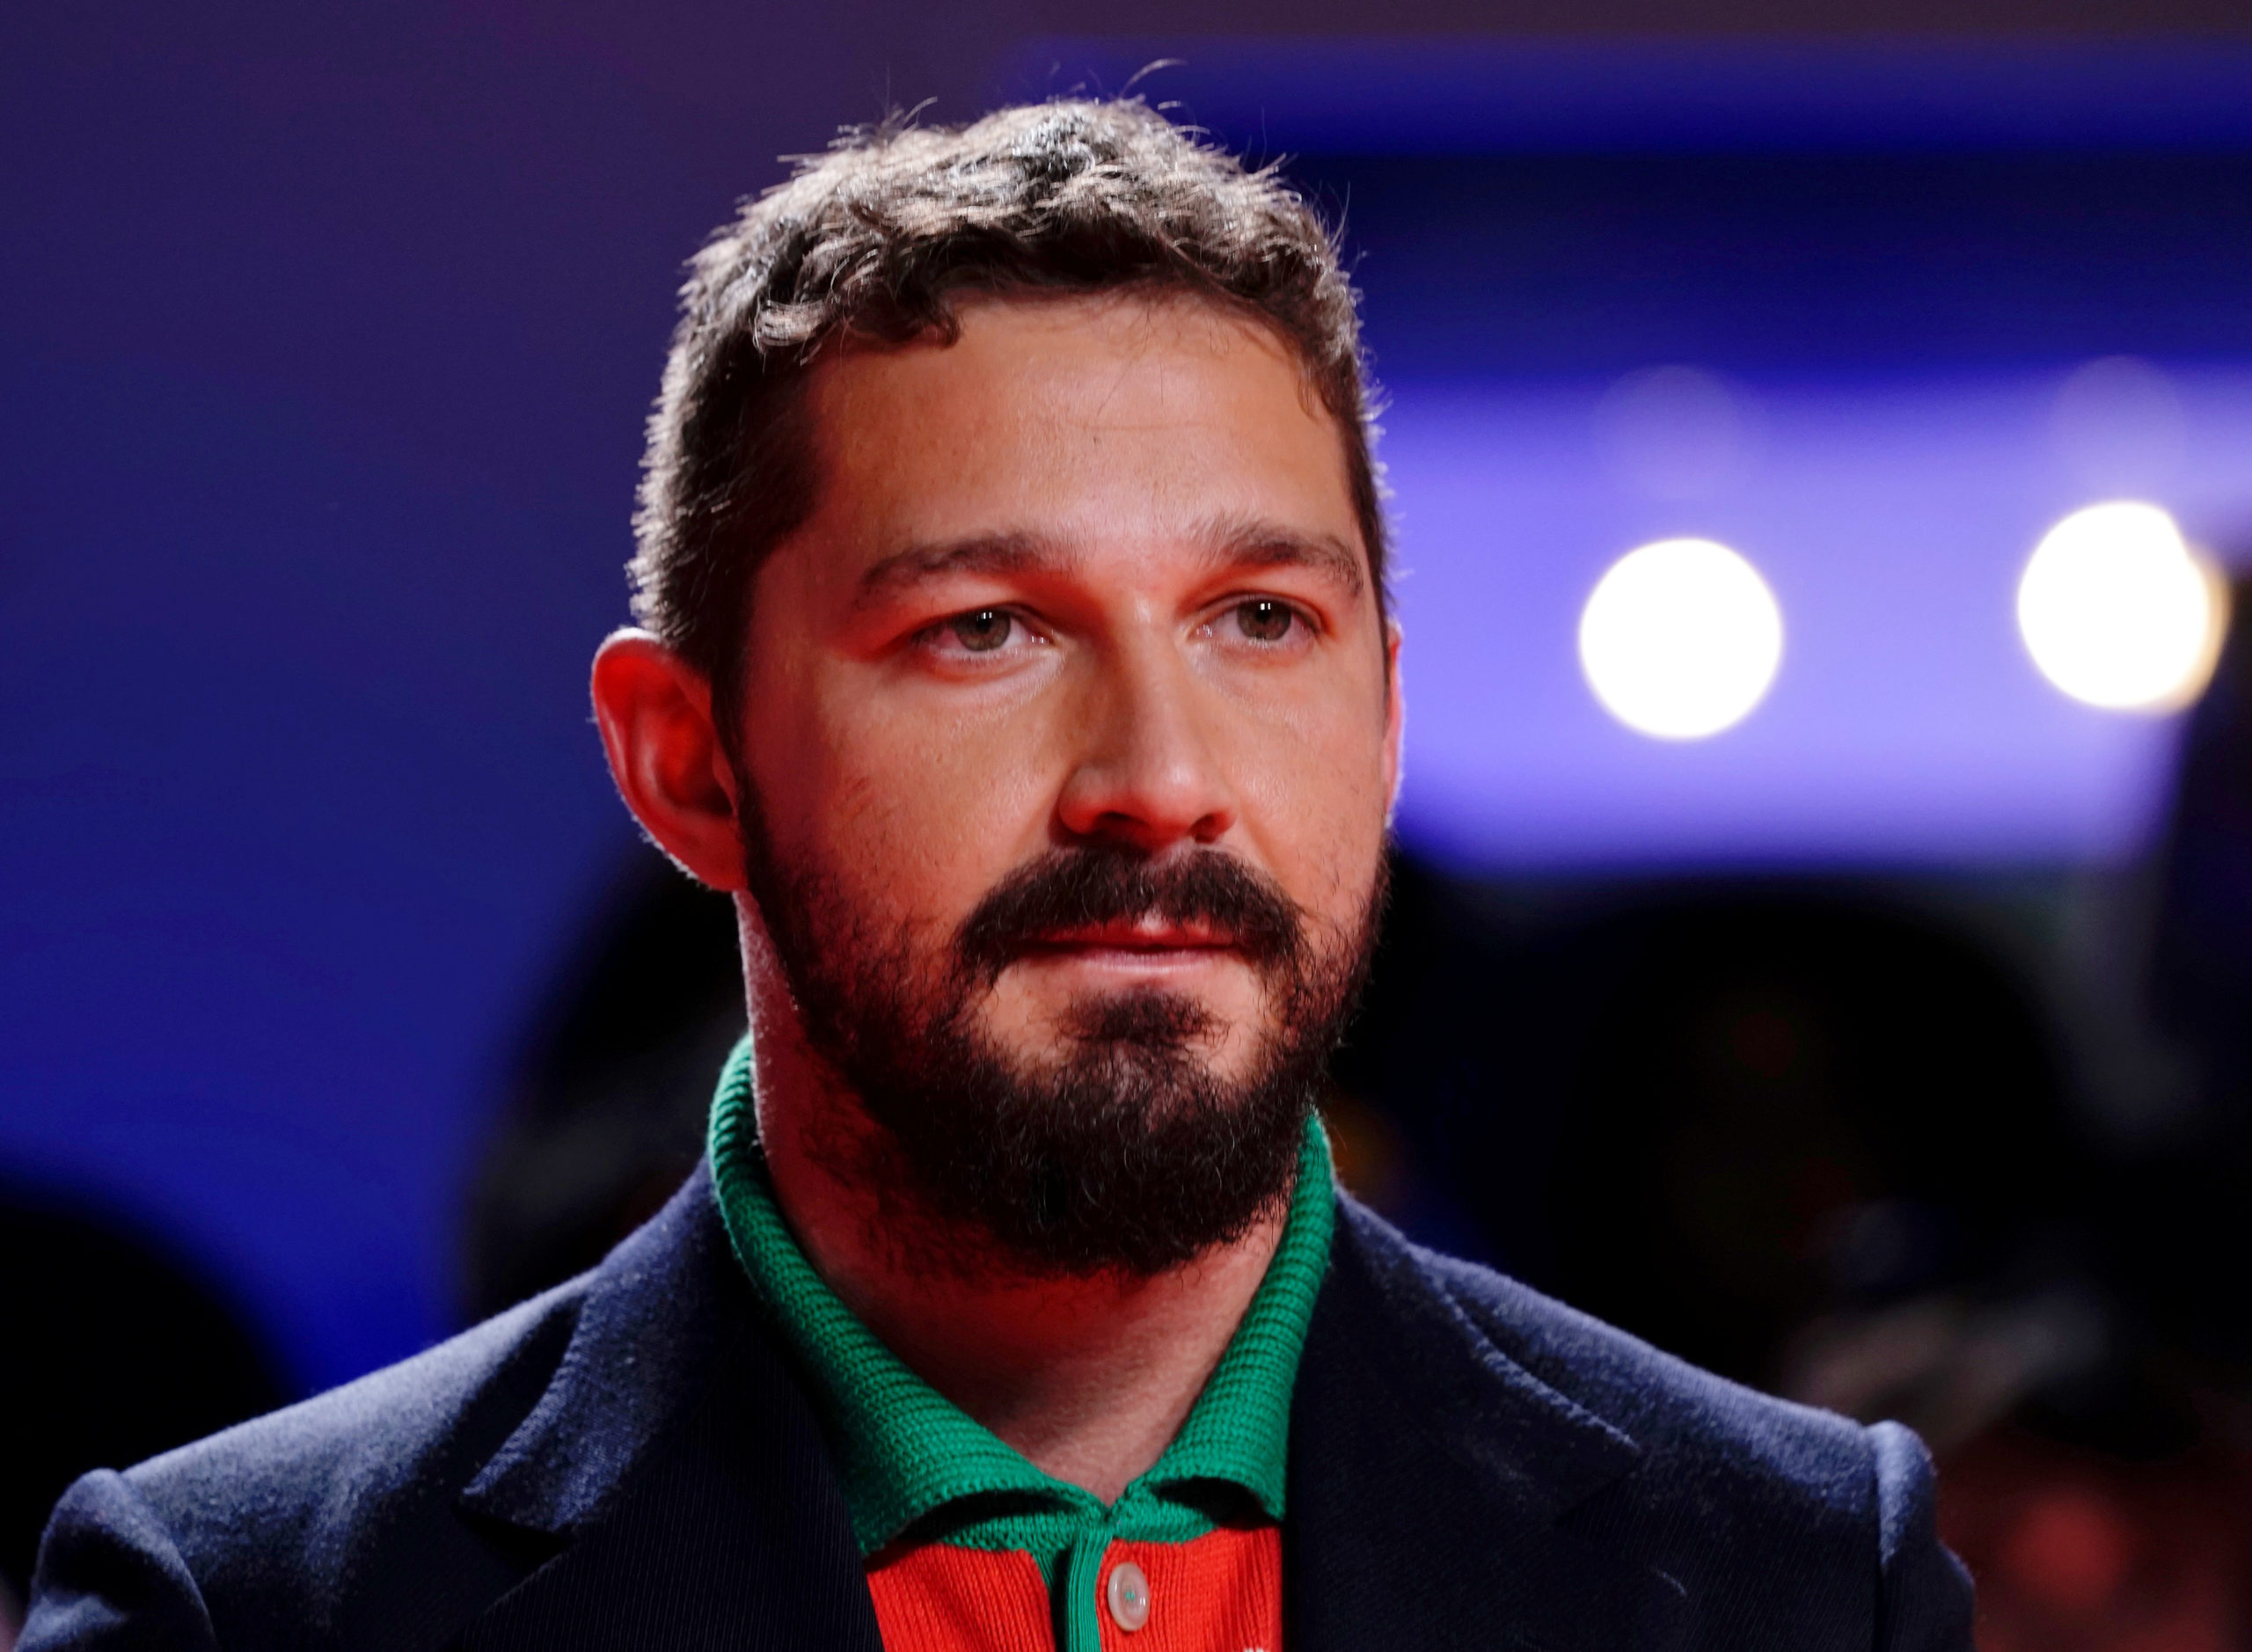 US actor Shia LaBeouf denies abuse claims by ex-girlfriend FKA twigs